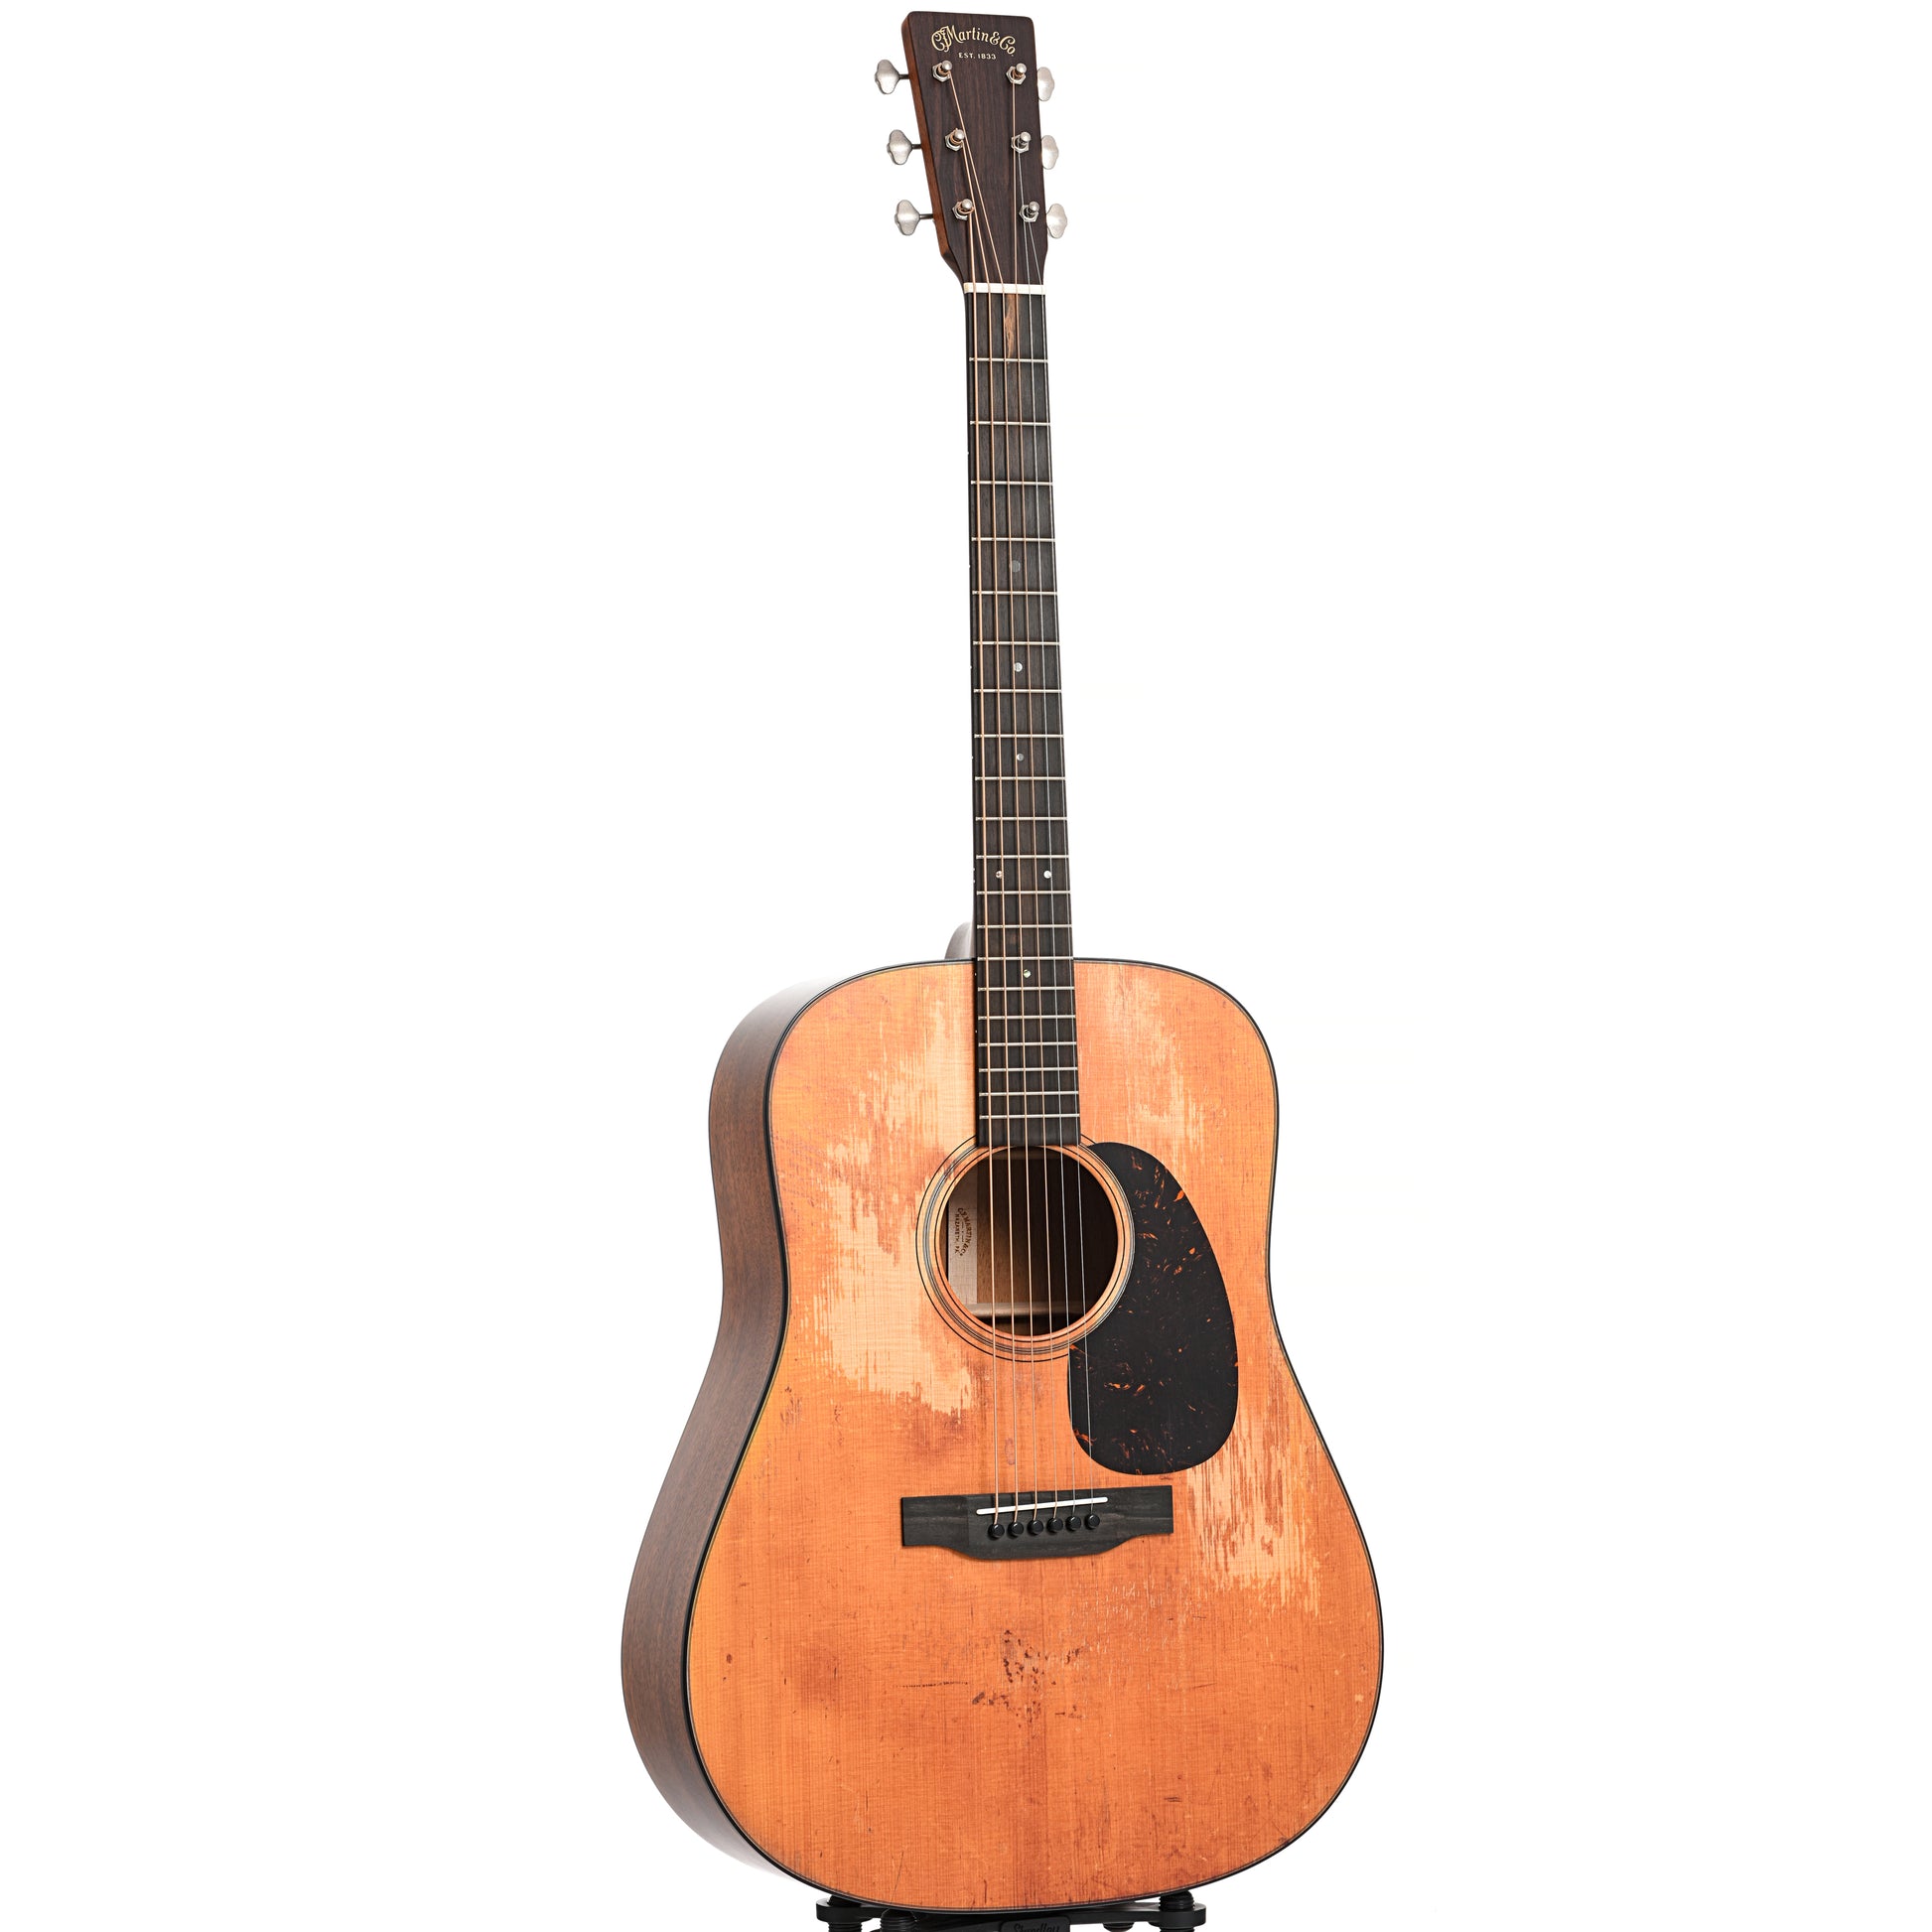 Full front and side of Martin D-18 StreetLegend Acoustic Guitar